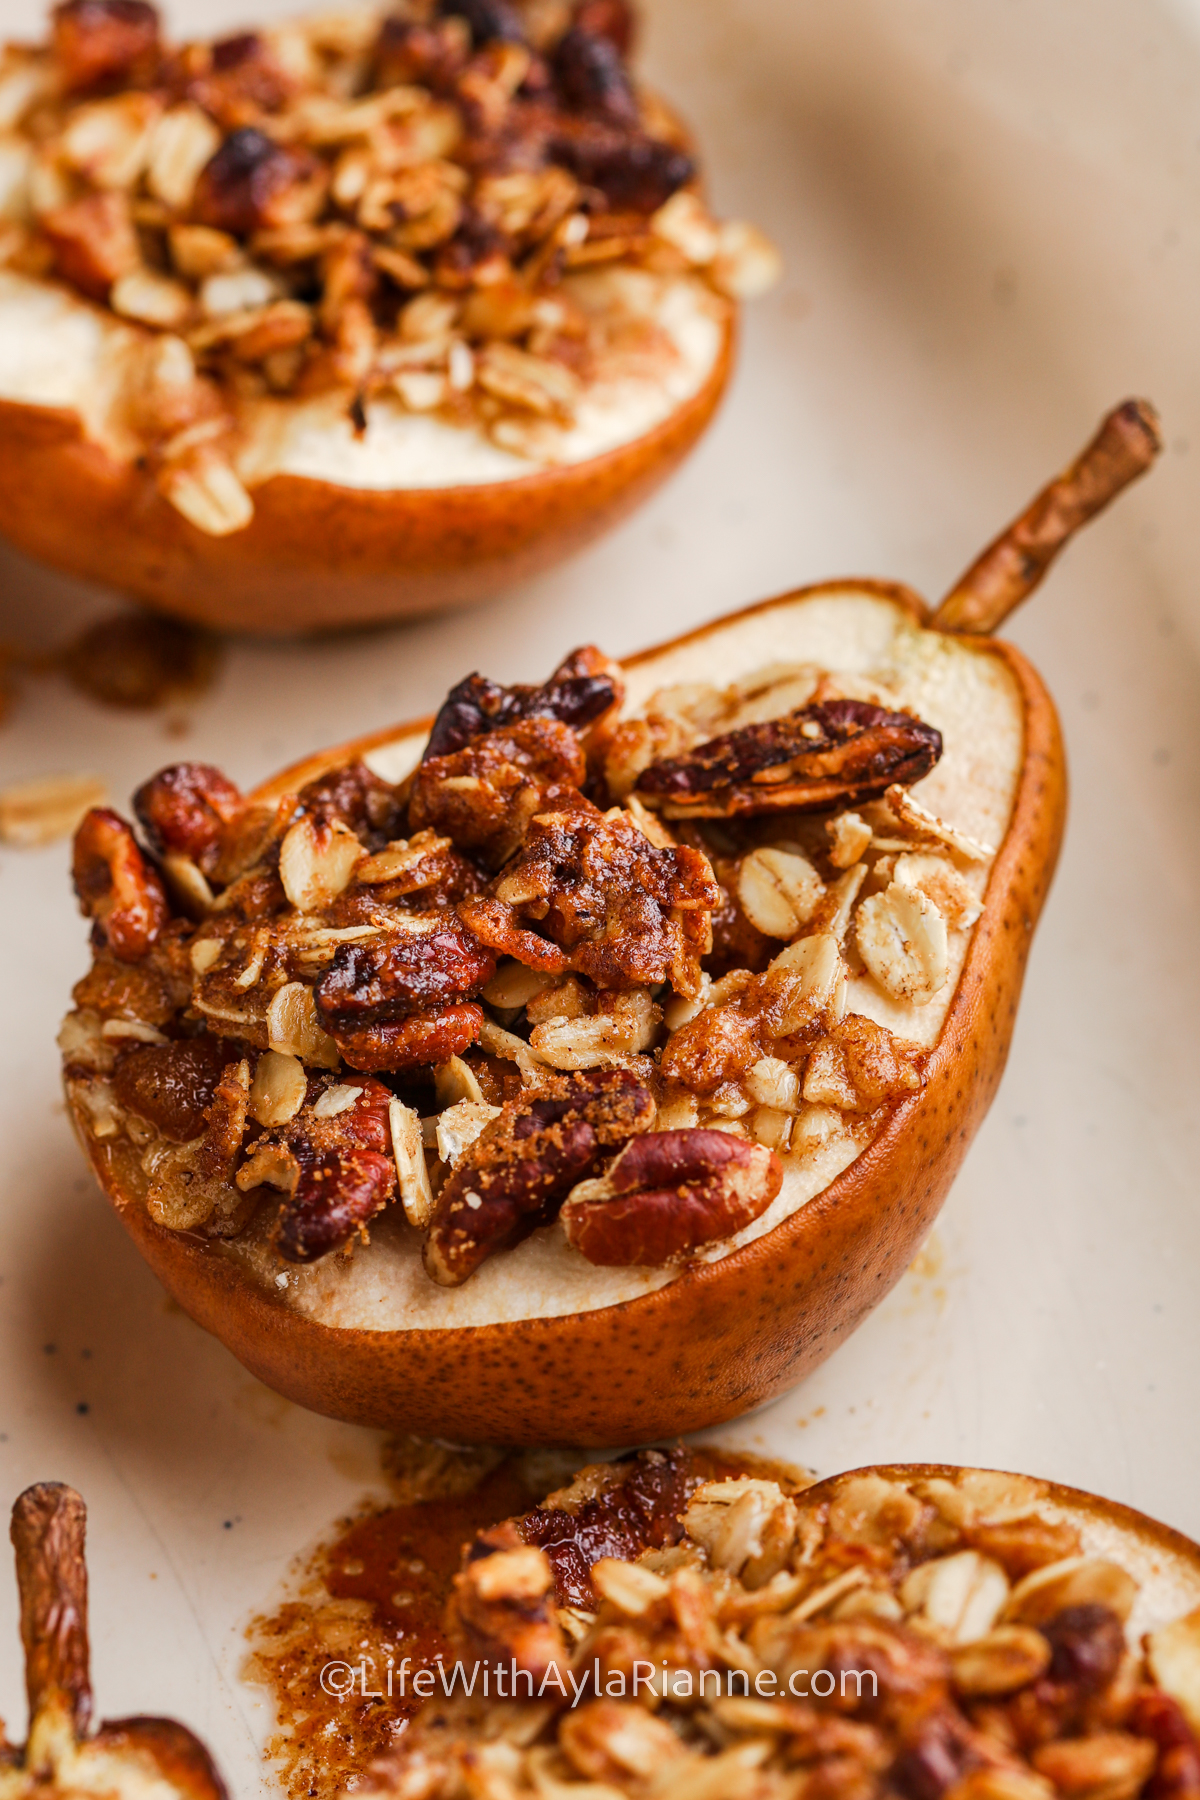 A baked pear topped with crumble mixture